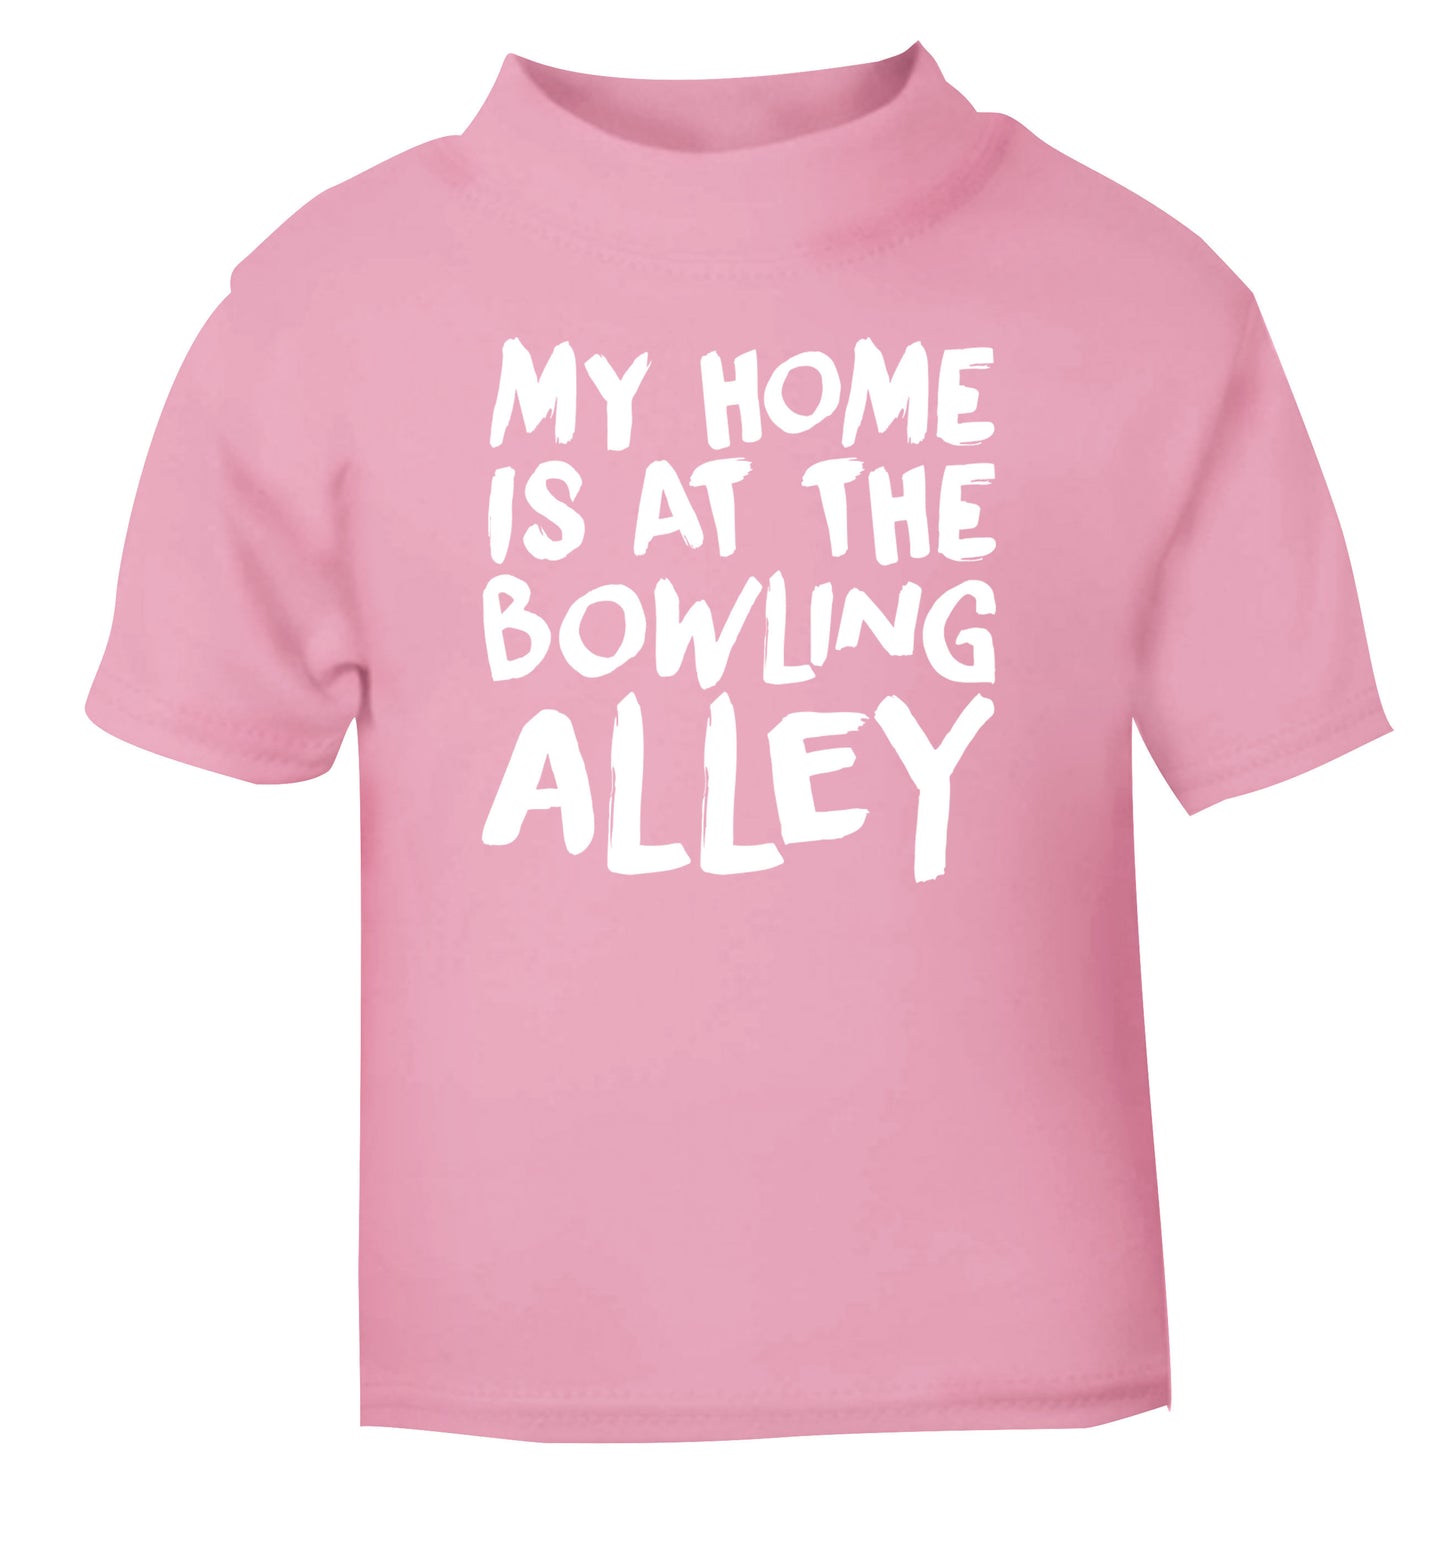 My home is at the bowling alley light pink Baby Toddler Tshirt 2 Years